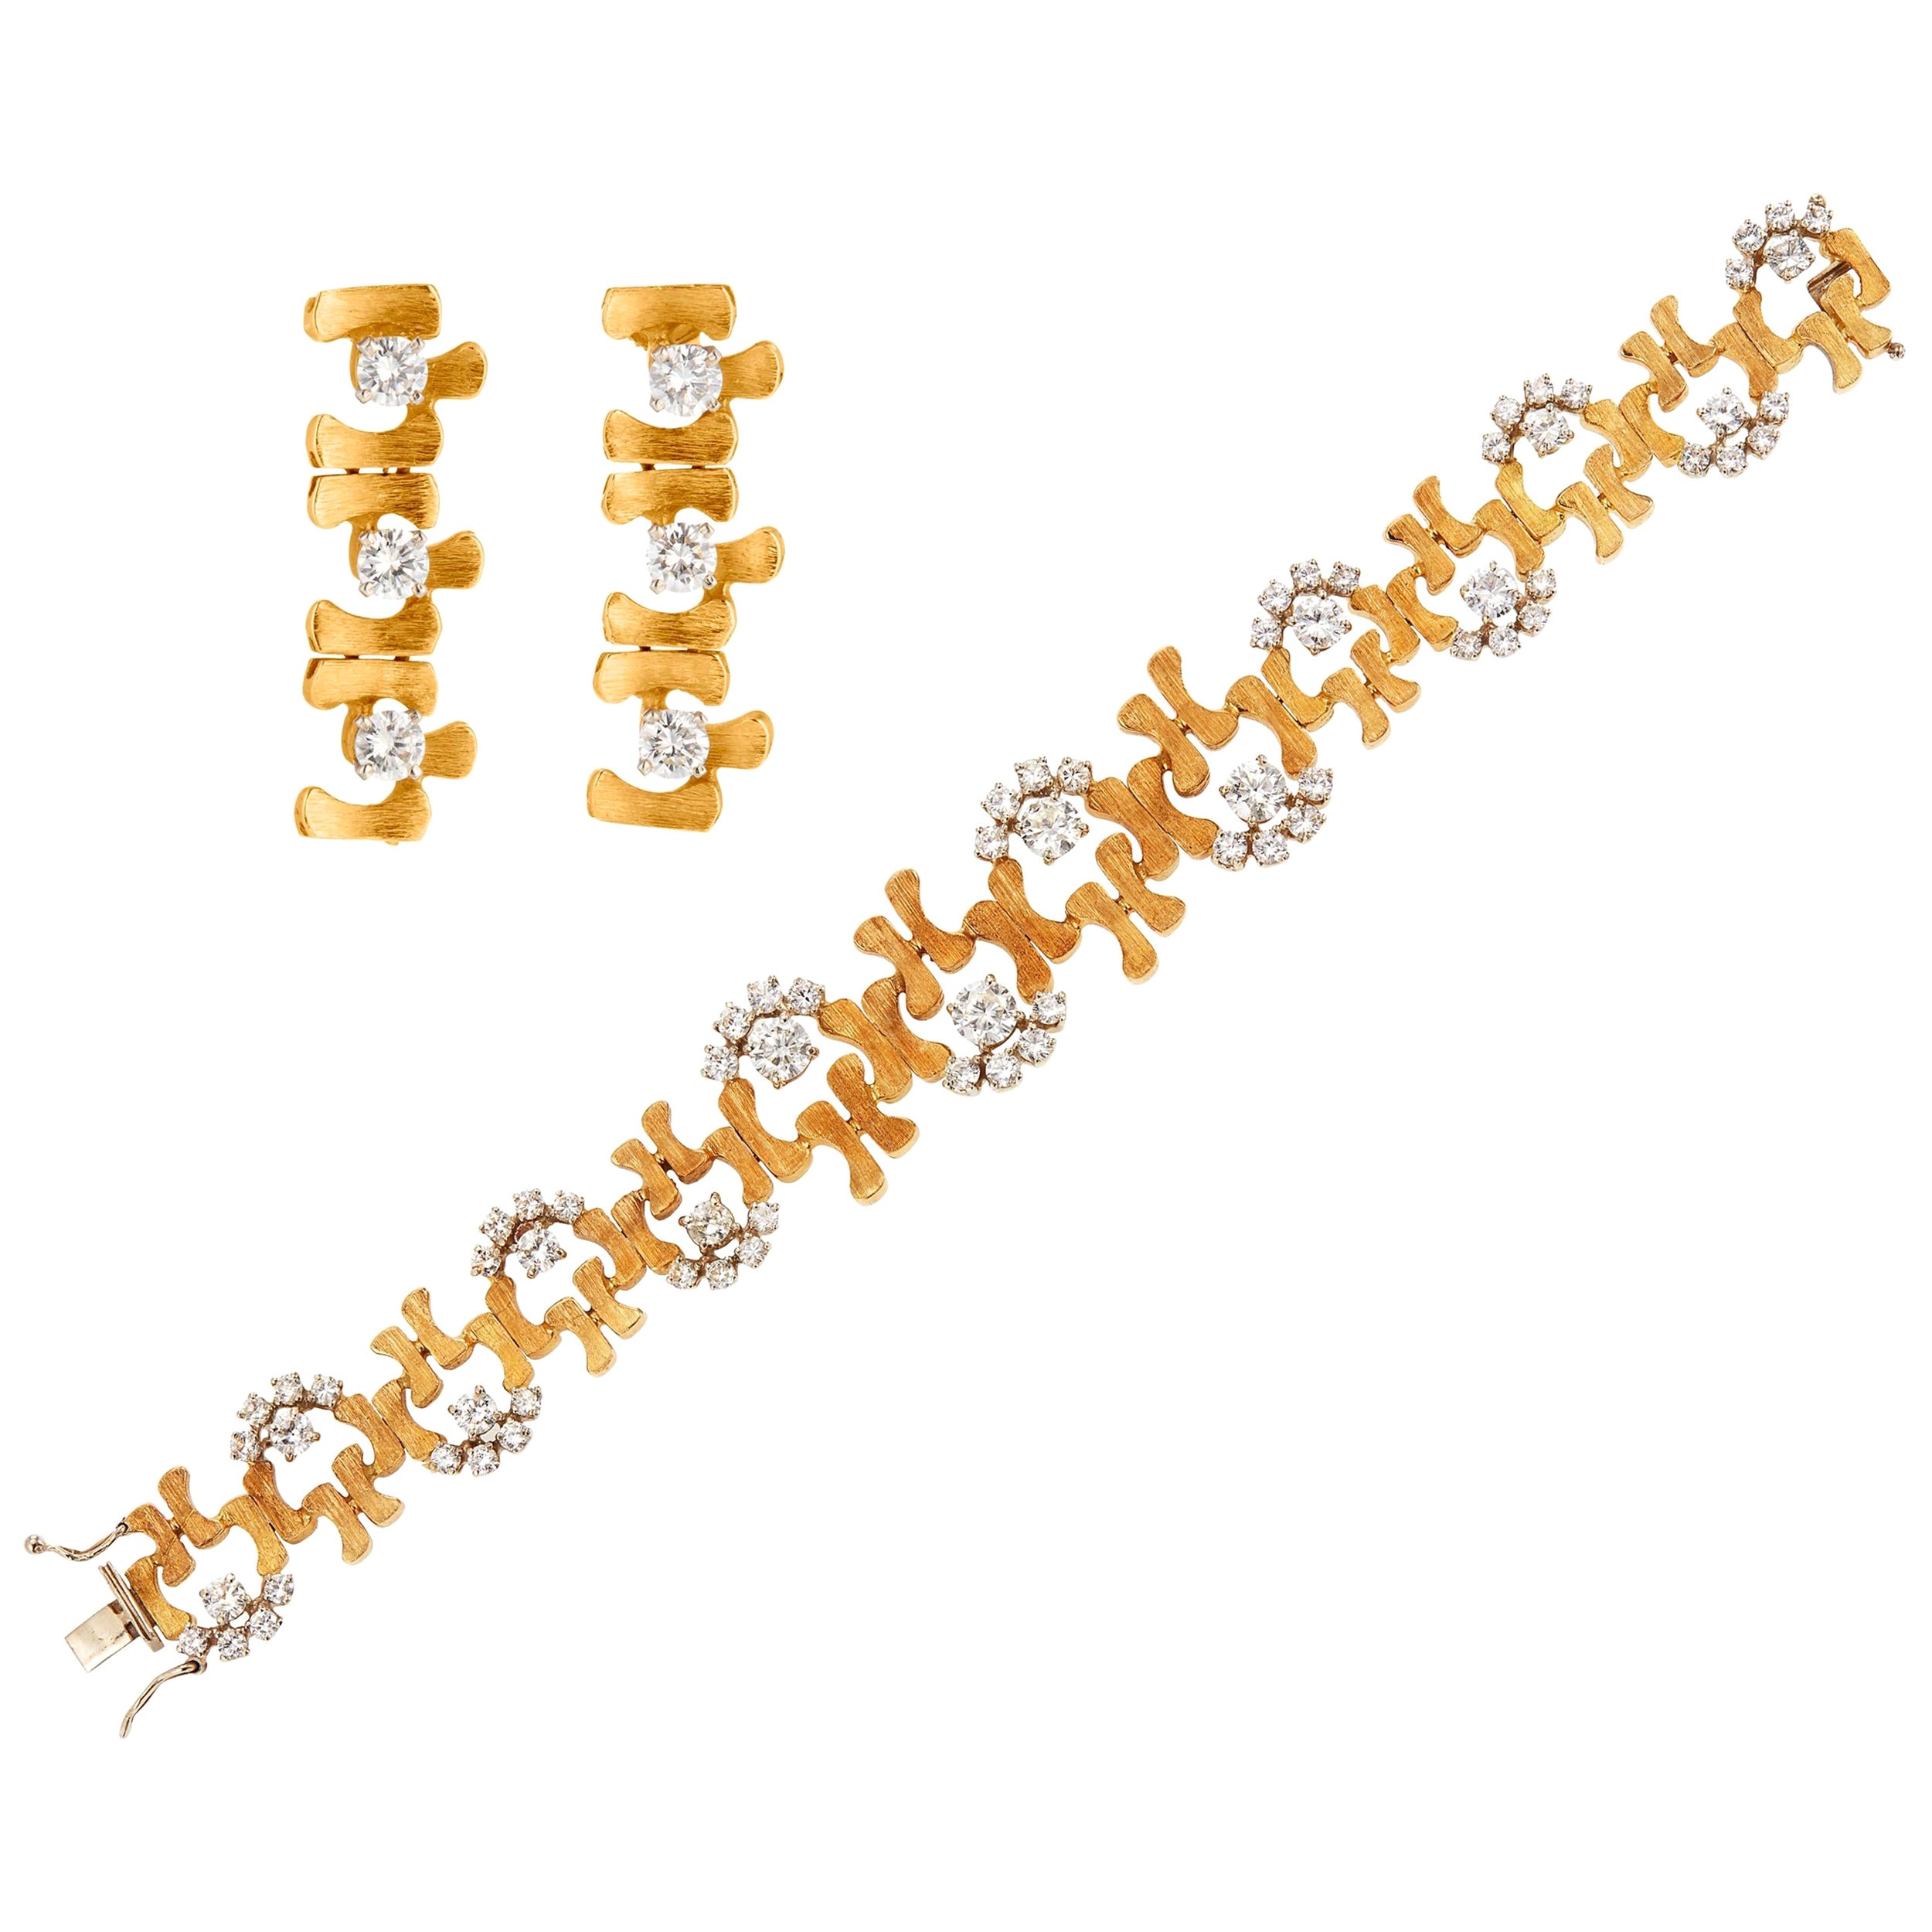 Marvelous Art Deco Style Diamond and 18 Kt Gold Bracelet and Earrings Suit For Sale